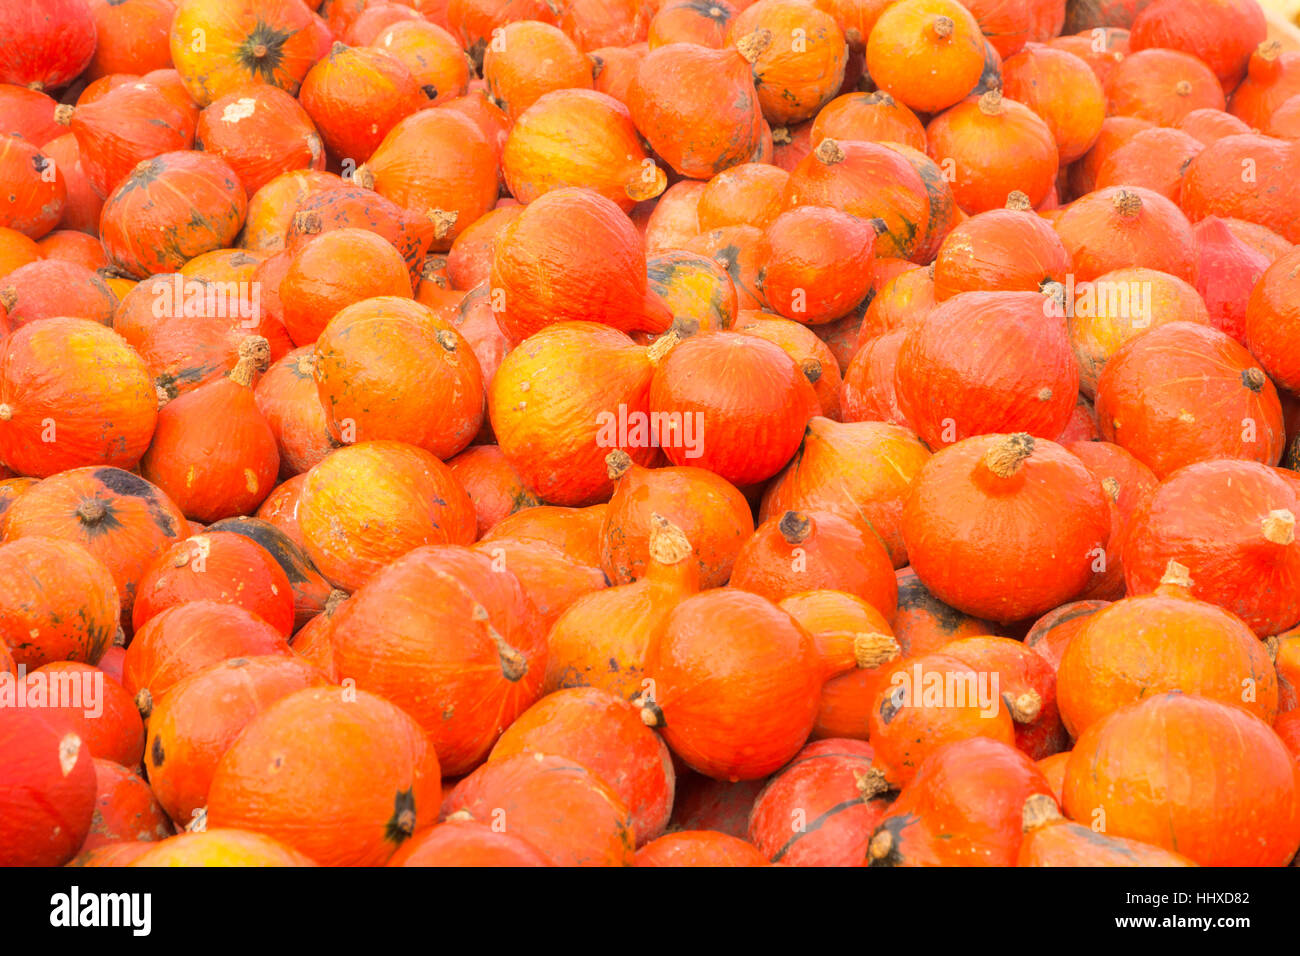 Background with a pile of red kuri squash pumpkins Stock Photo